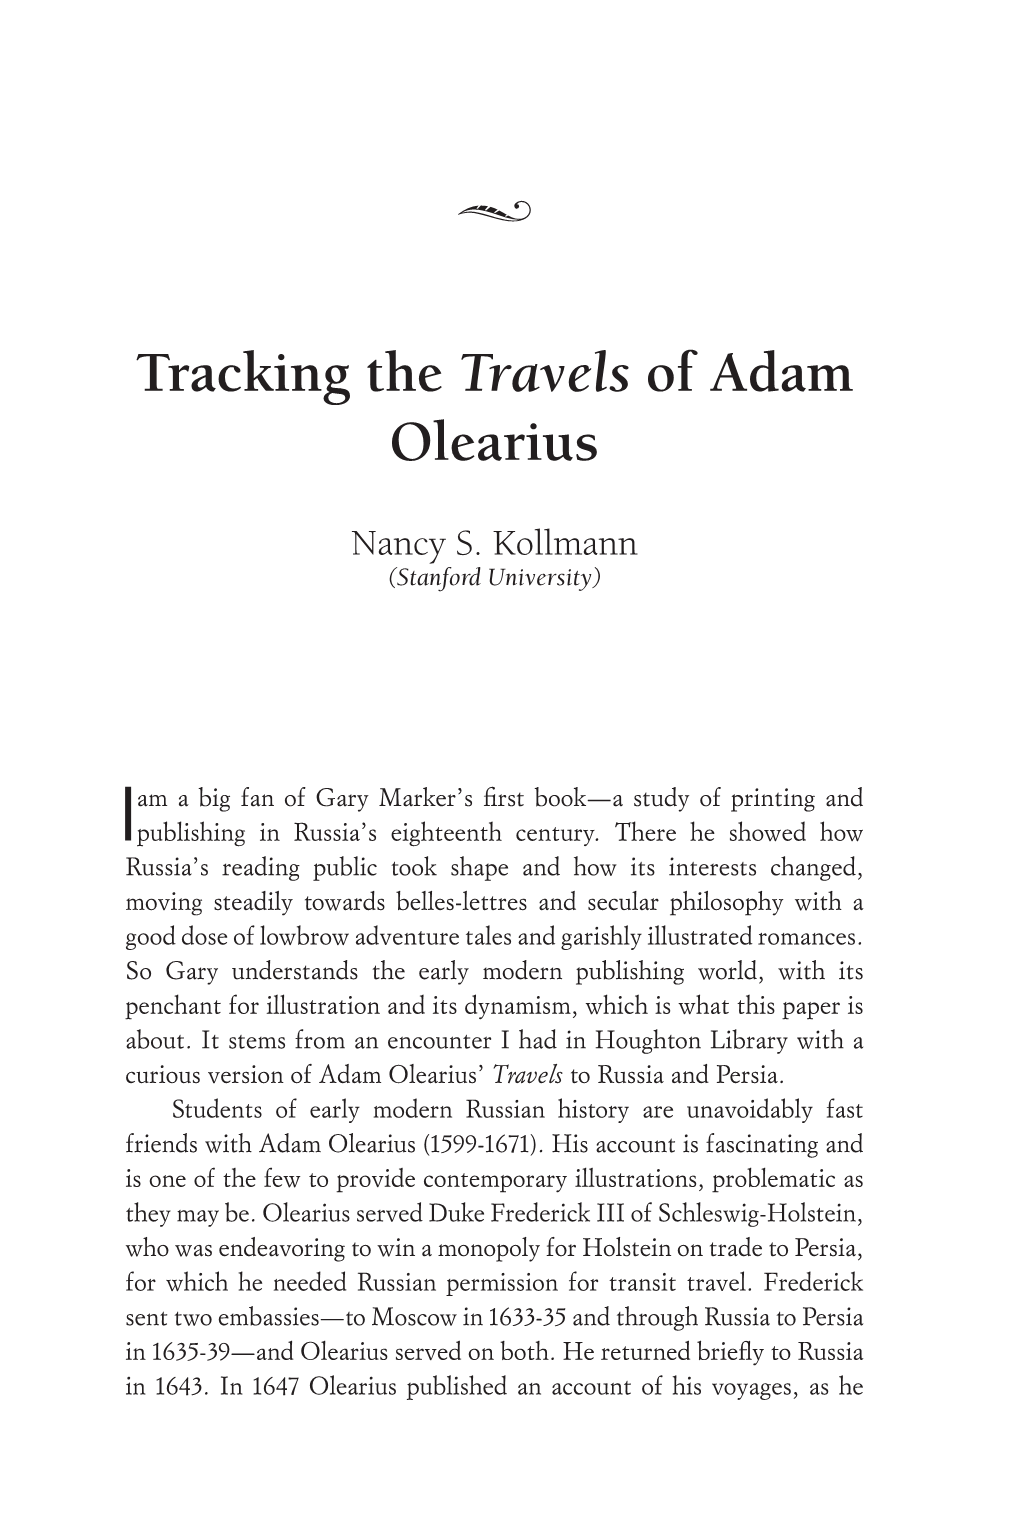 Tracking the Travels of Adam Olearius